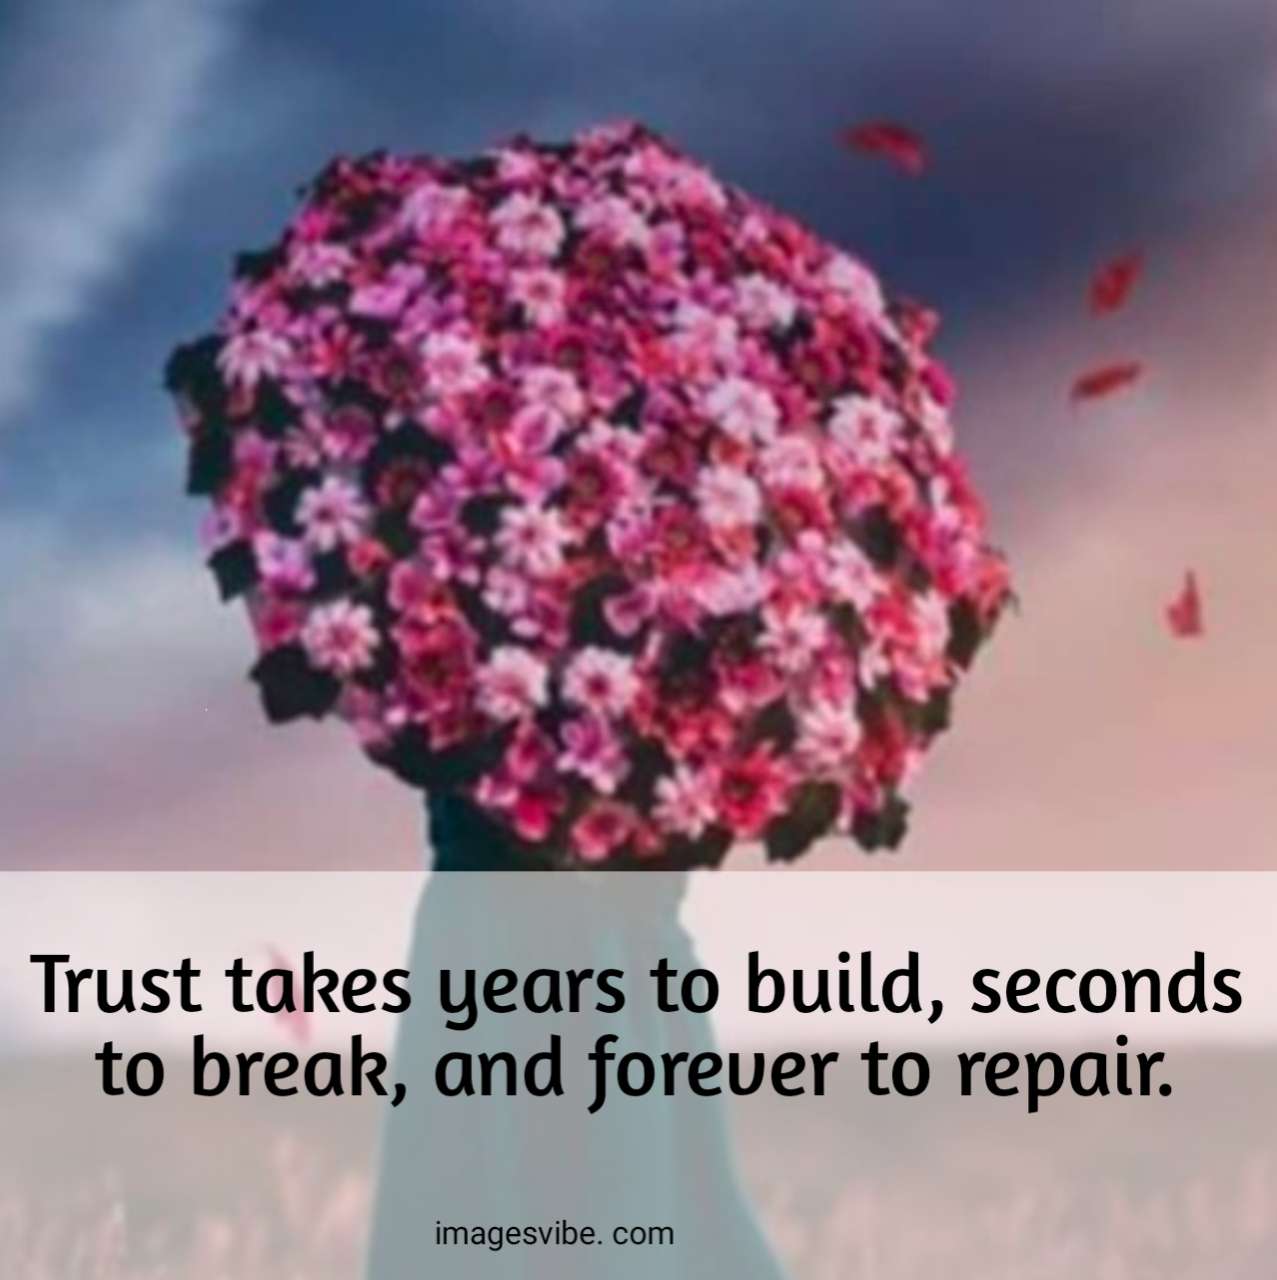 Images With Quotes About Trust6 